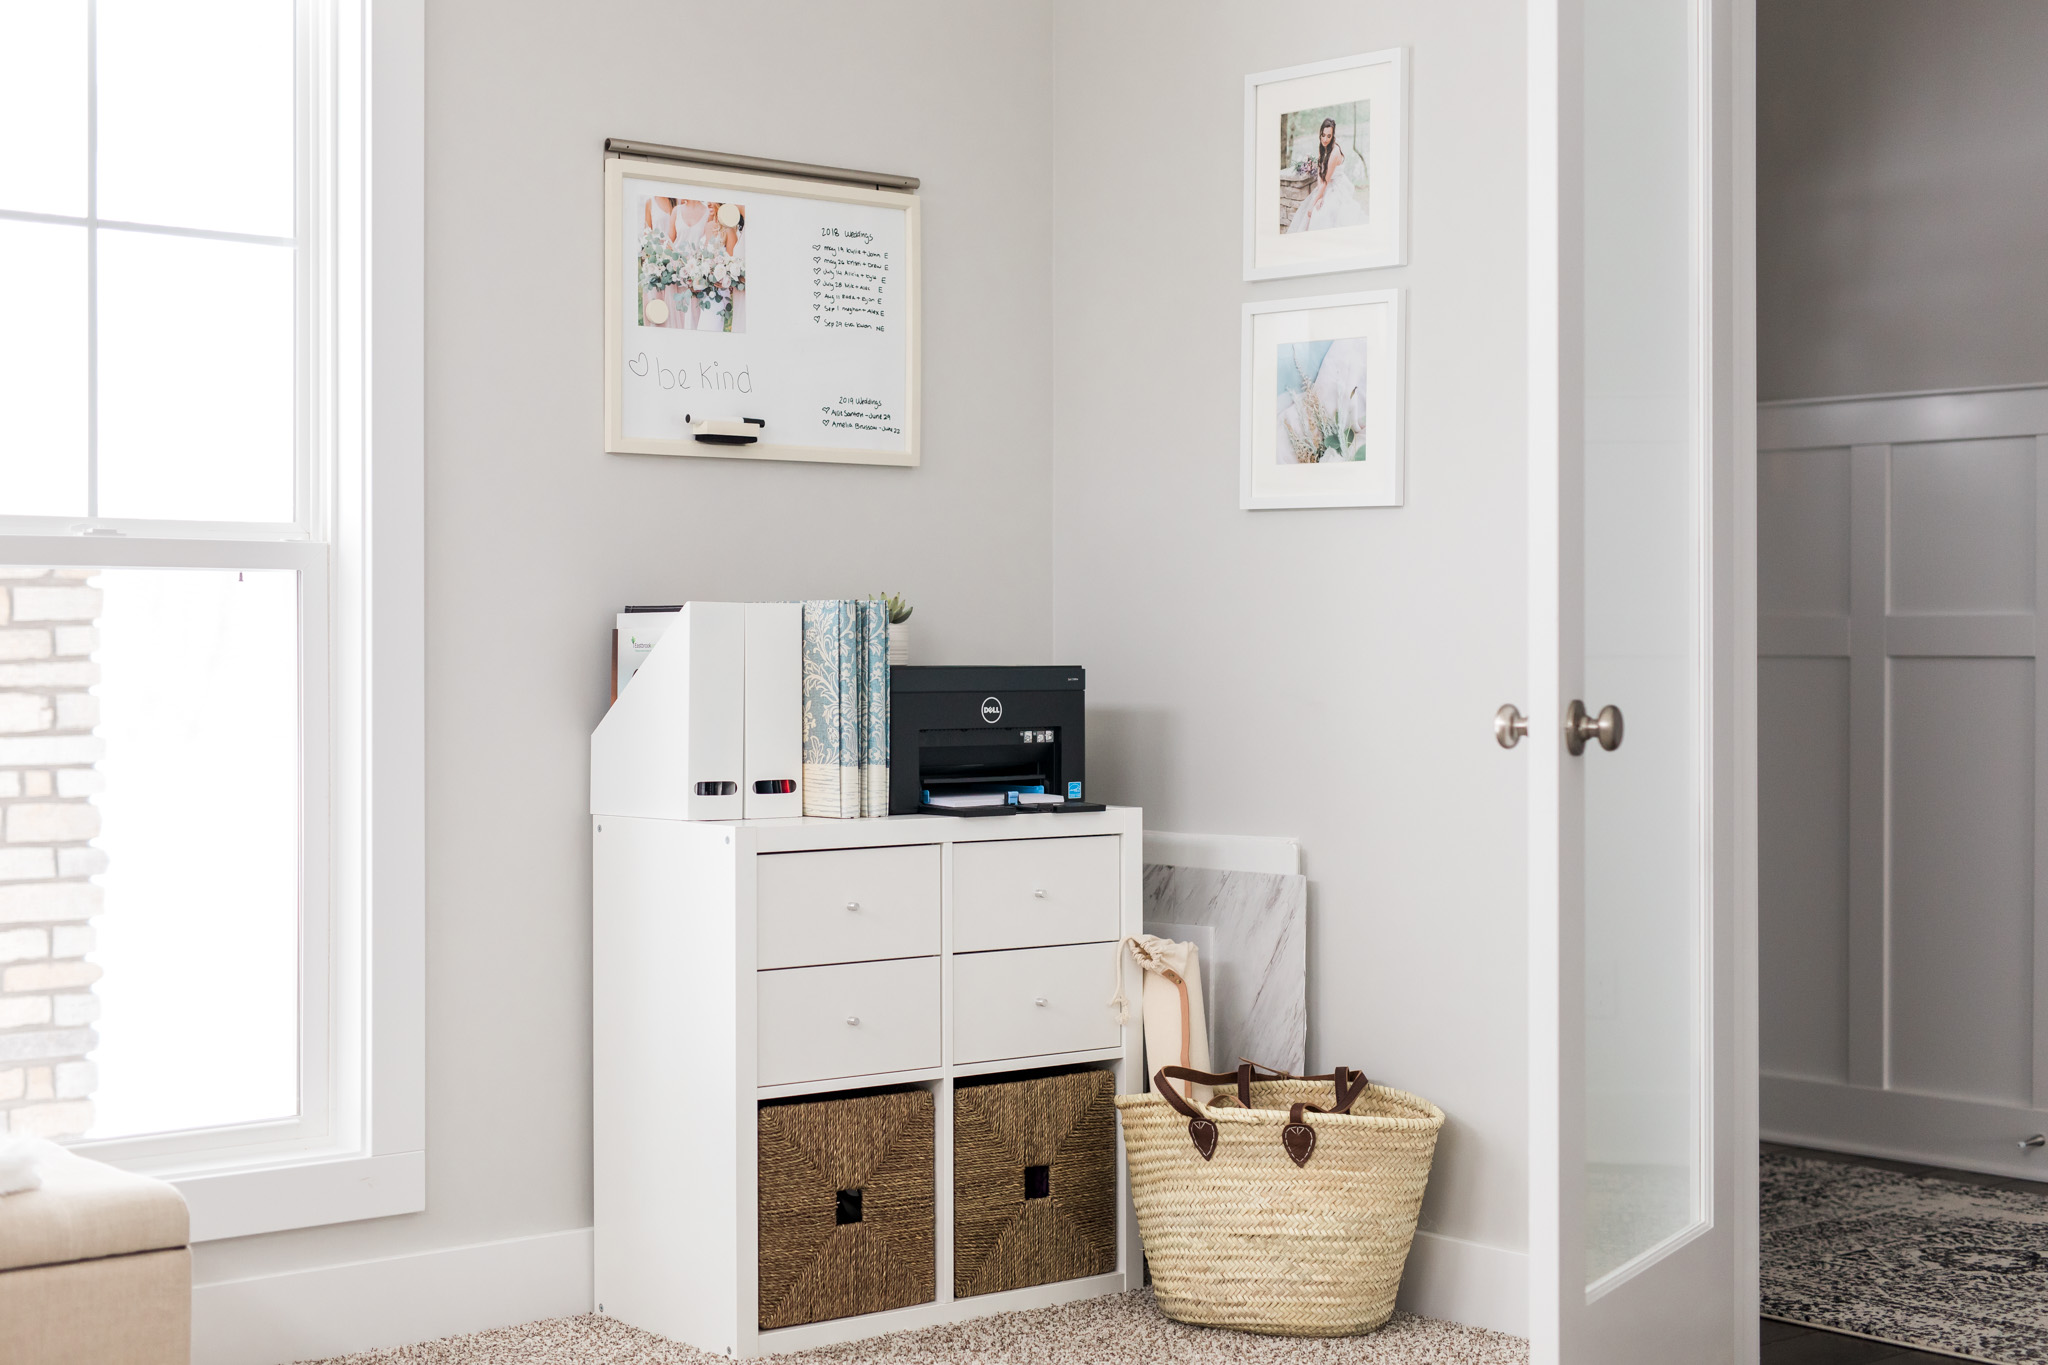 Light and airy mid-century modern home office | Office tour | Girly blush and gold details | white desk | Laurenda Marie Photography